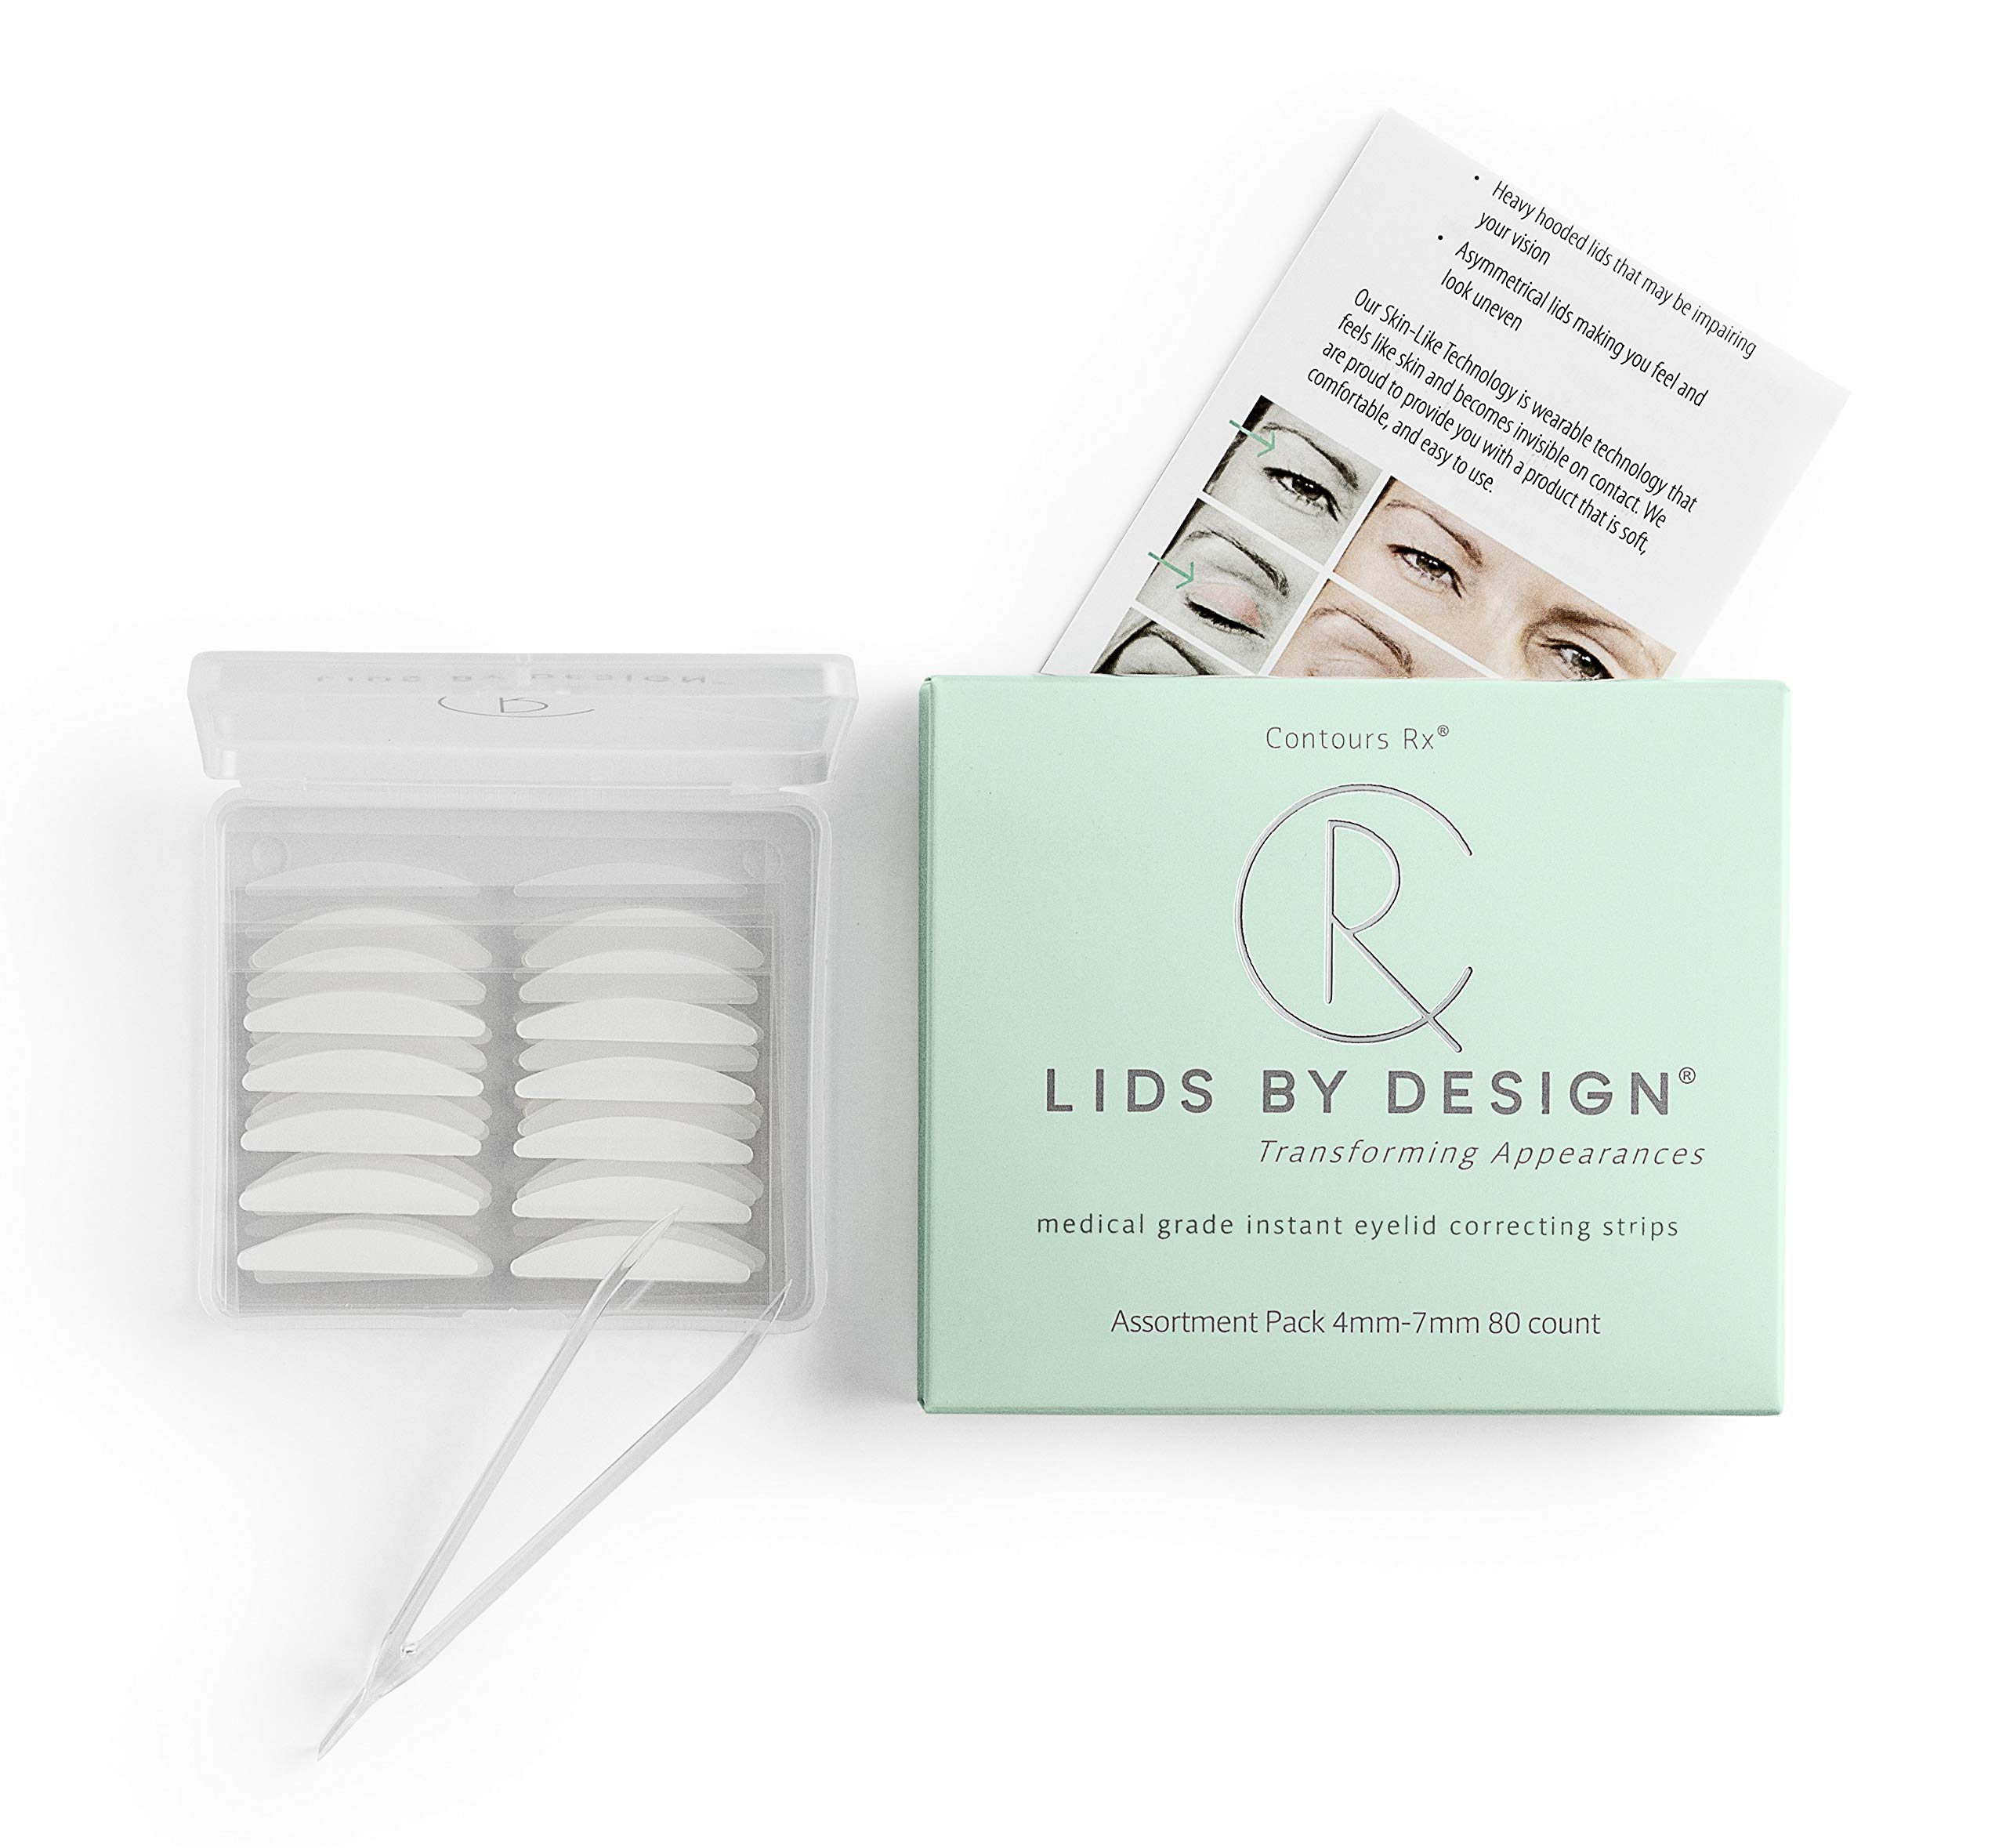 LIDS BY DESIGN Assortment Pack (4mm - 7mm) Eyelid Correcting